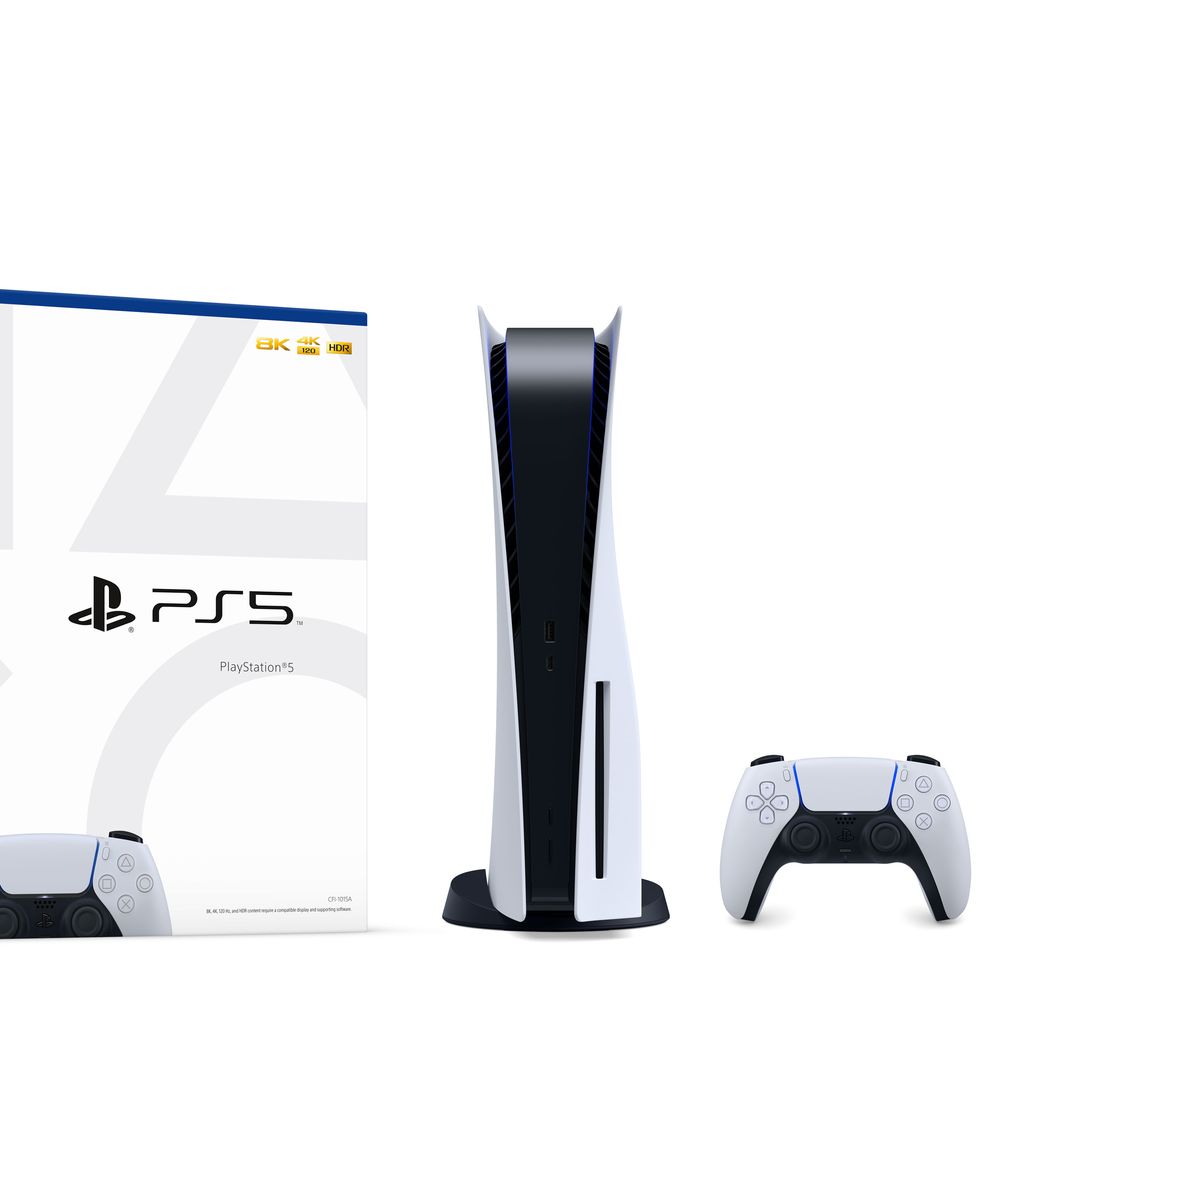 what's the price on the playstation 5